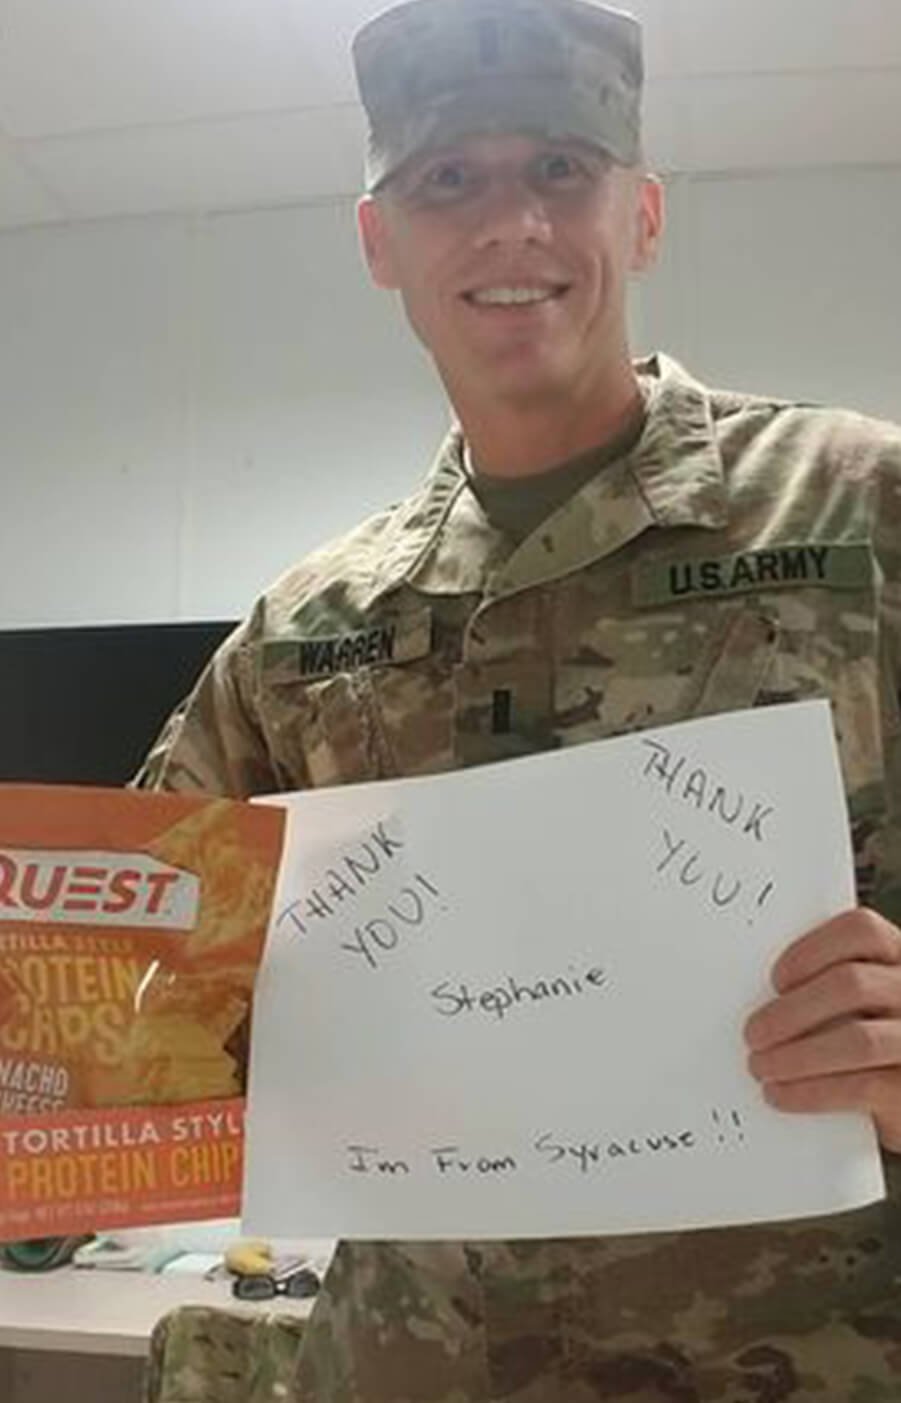 Troop holding care package and sign